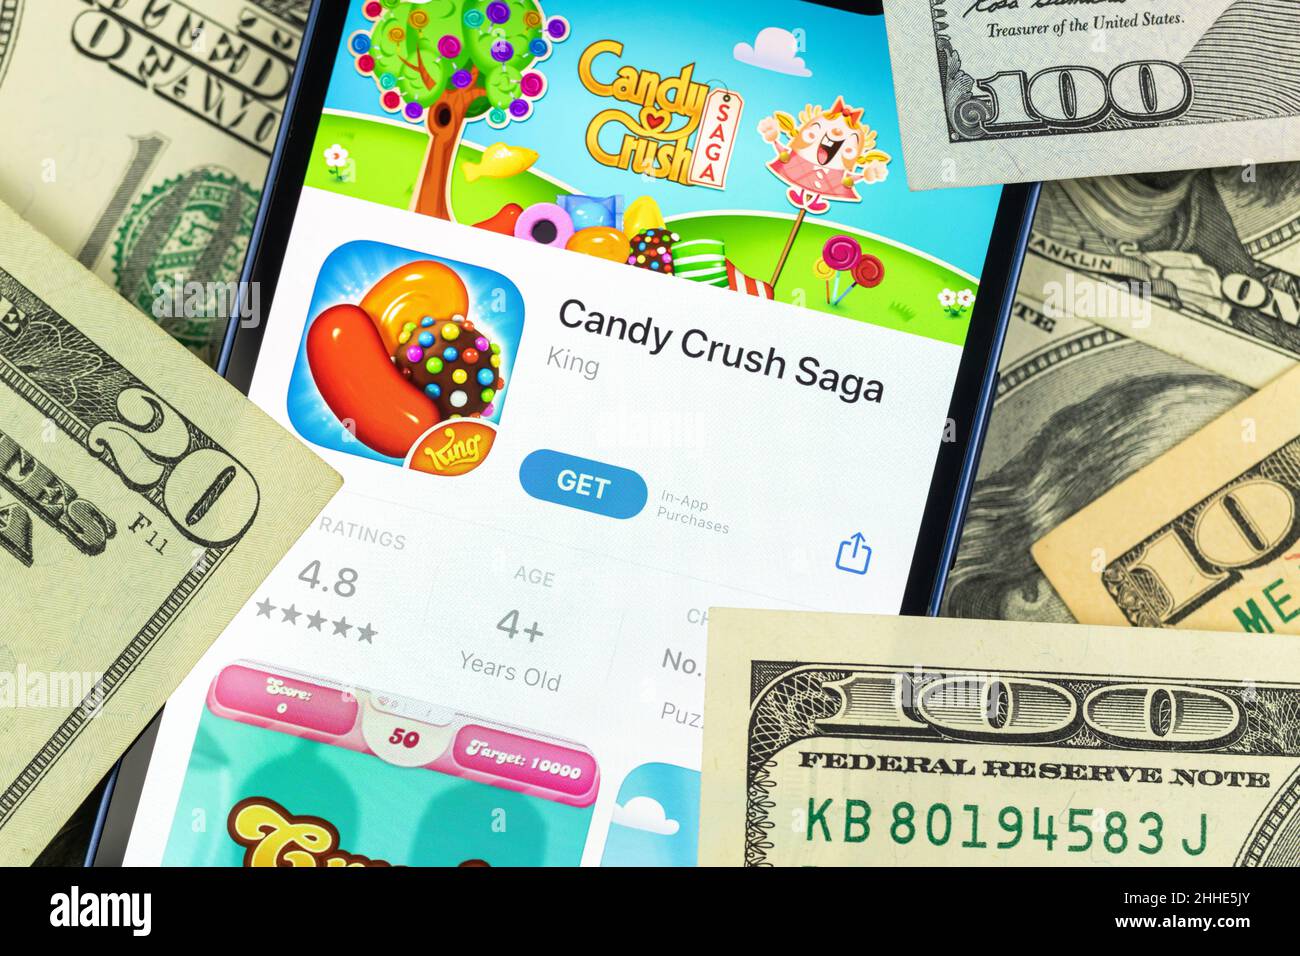 Candy Crush Saga Players Spent Over $1.3 Billion on In-App Purchases in  2014 - MacRumors